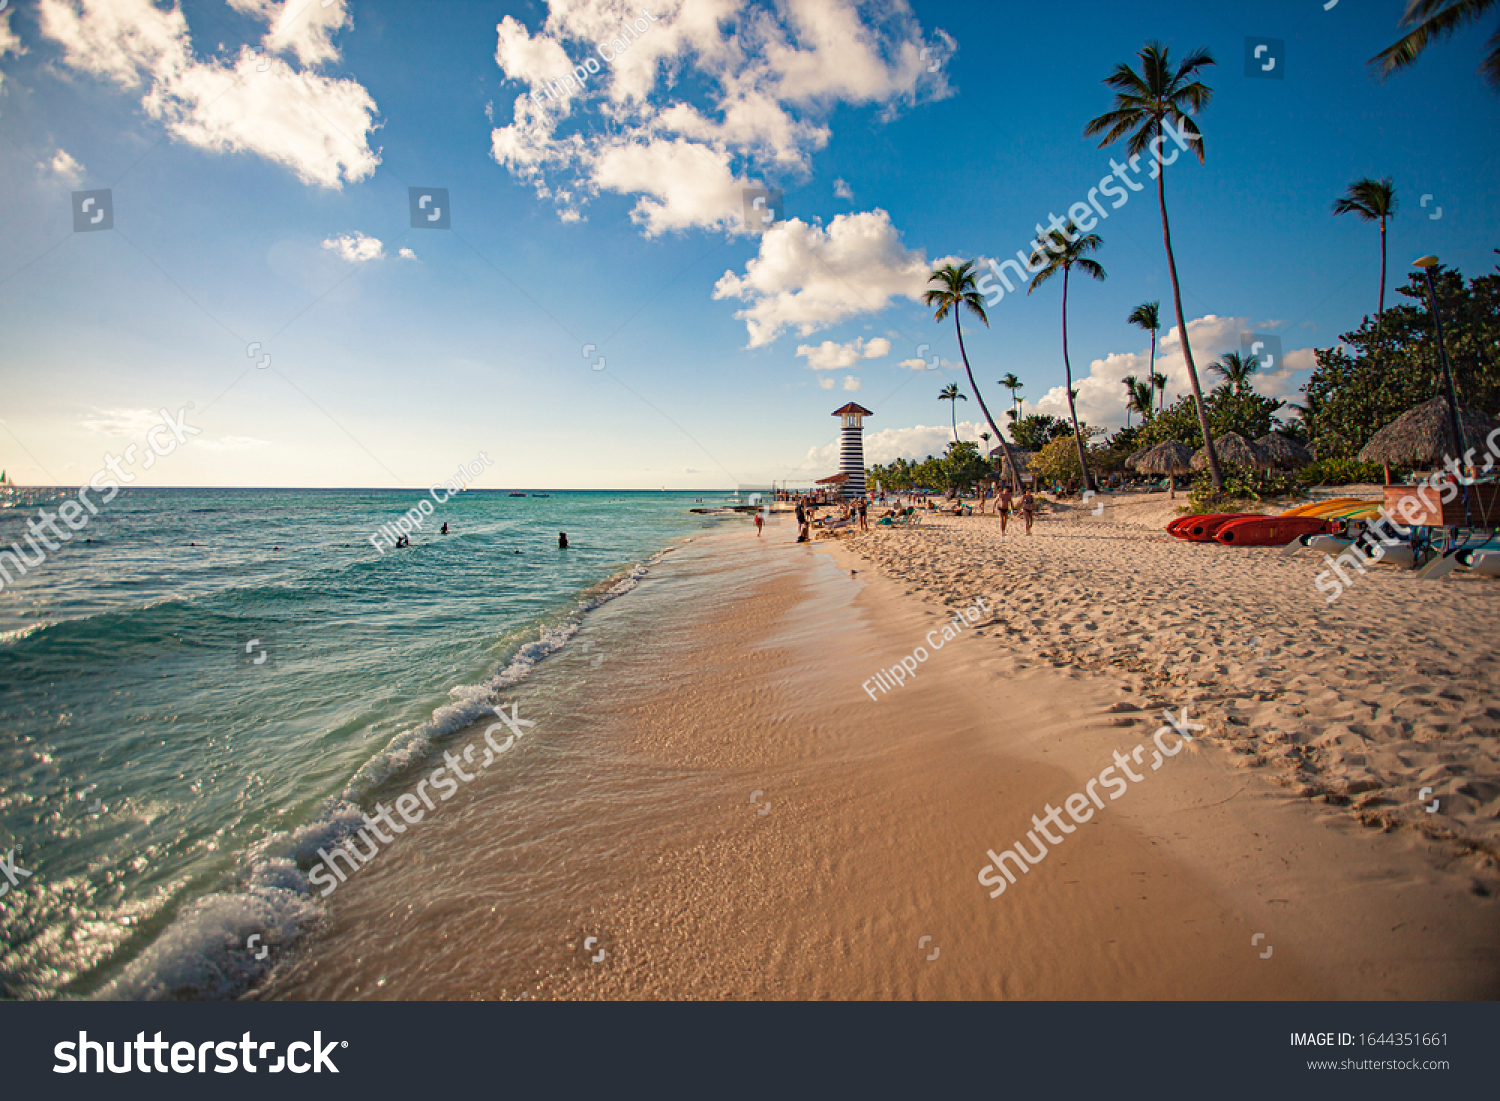 Dominicus Beach detail at sunset, Dominican republic #1644351661